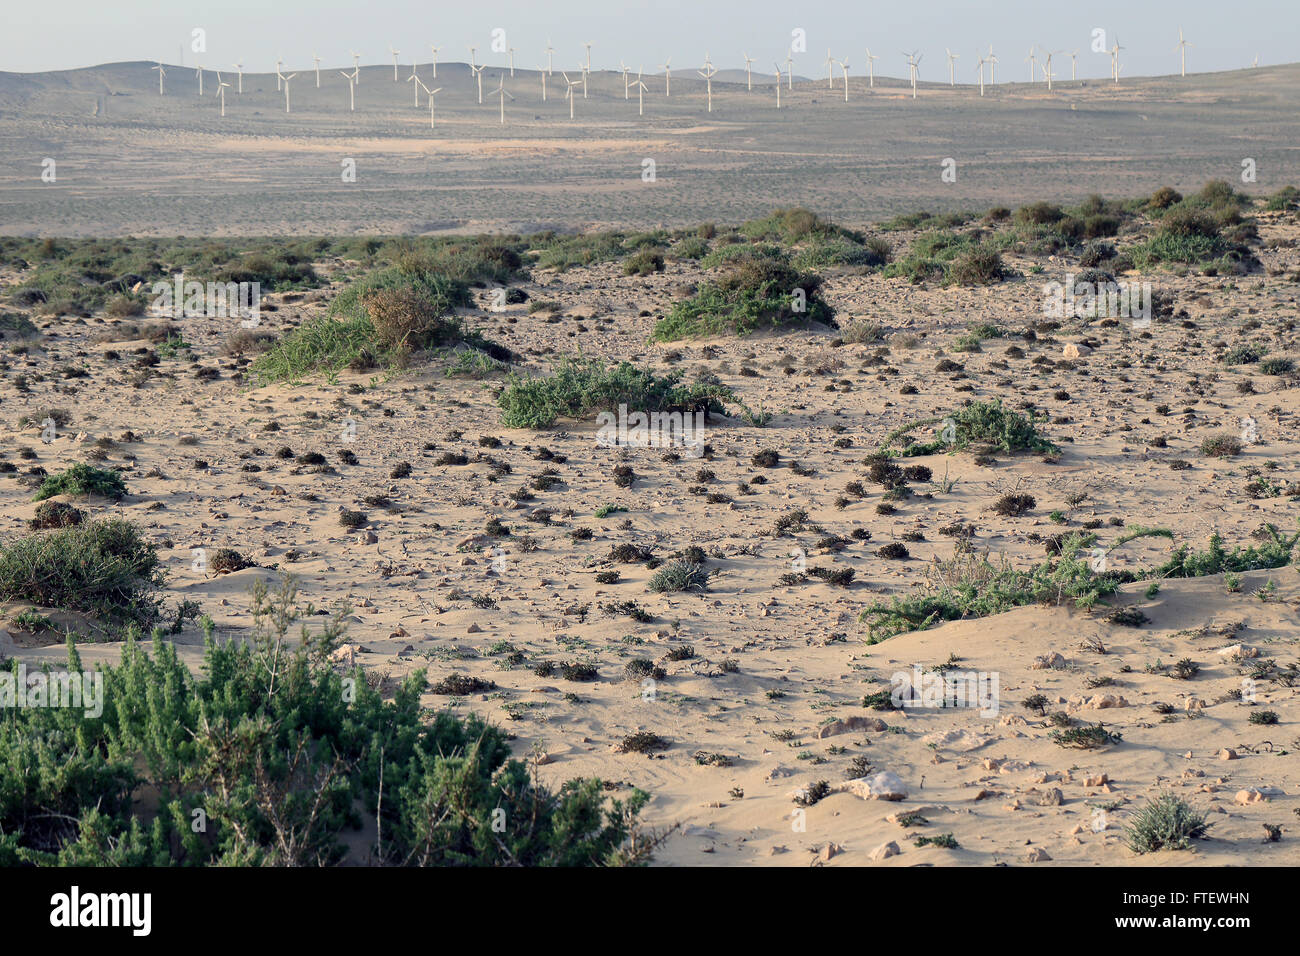 Typical stony desert landscape and vegetation with a distant windfarm, Fuerteventura, Canary Islands, Spain. Stock Photo